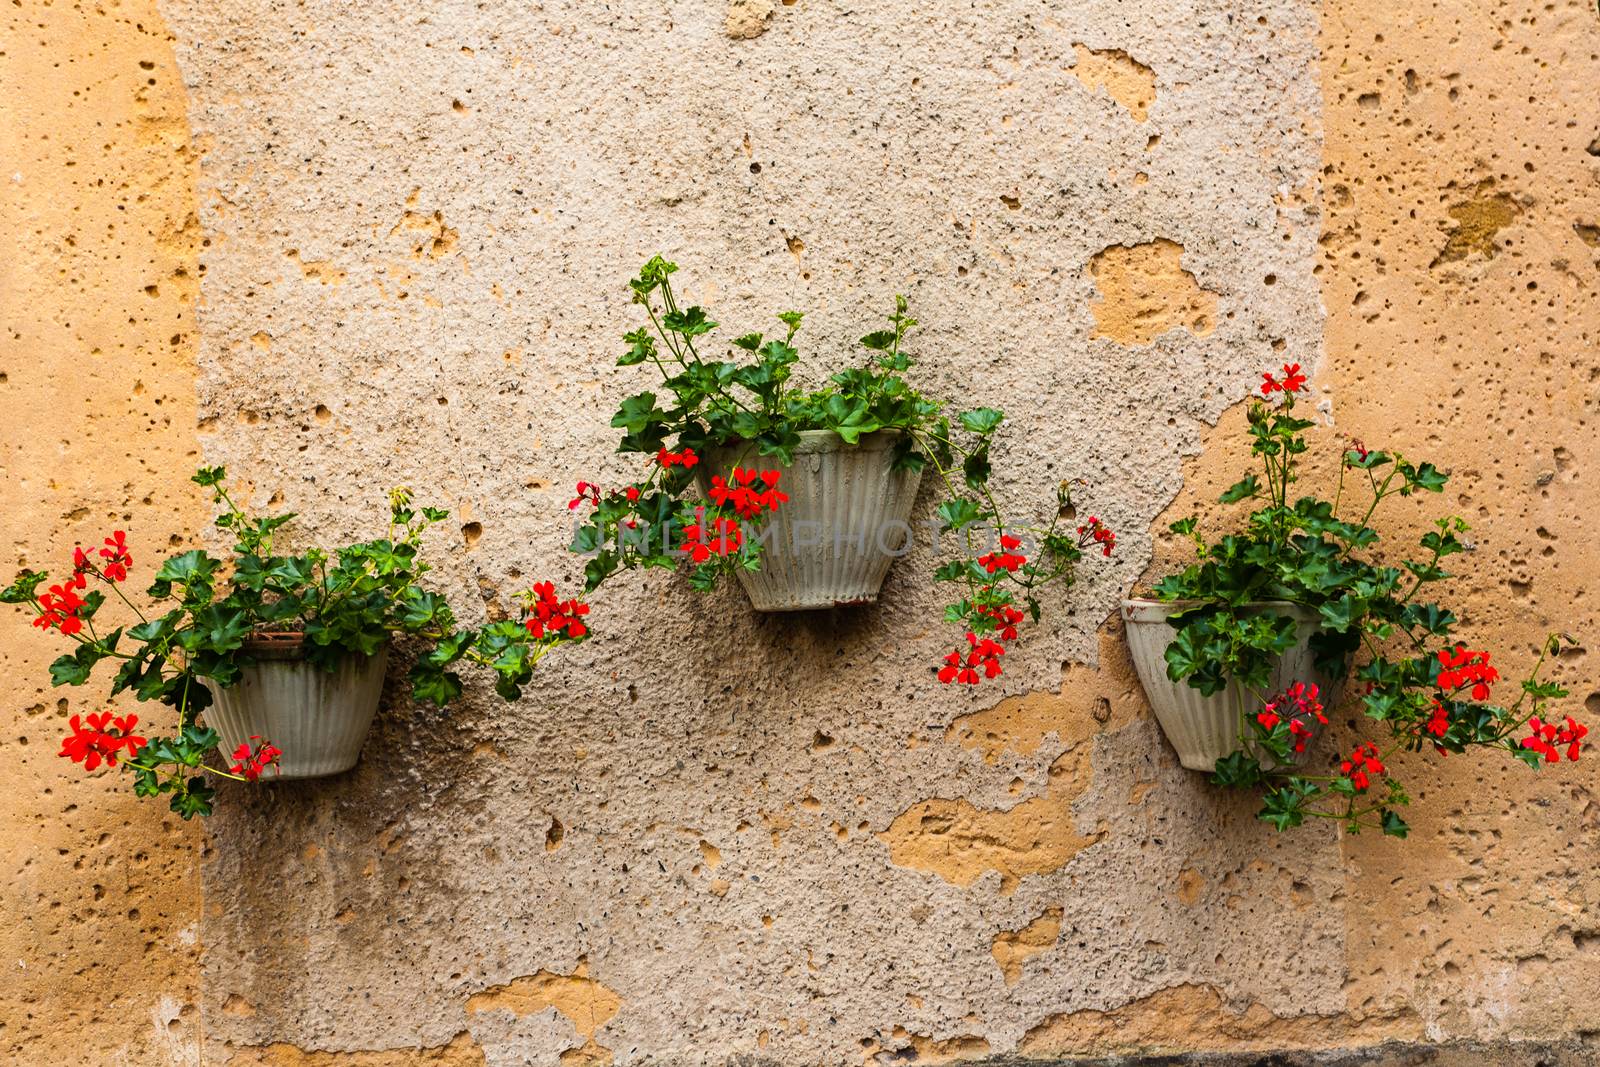 Three geranium pots hanging from a textured wall in the french region of Dordogne